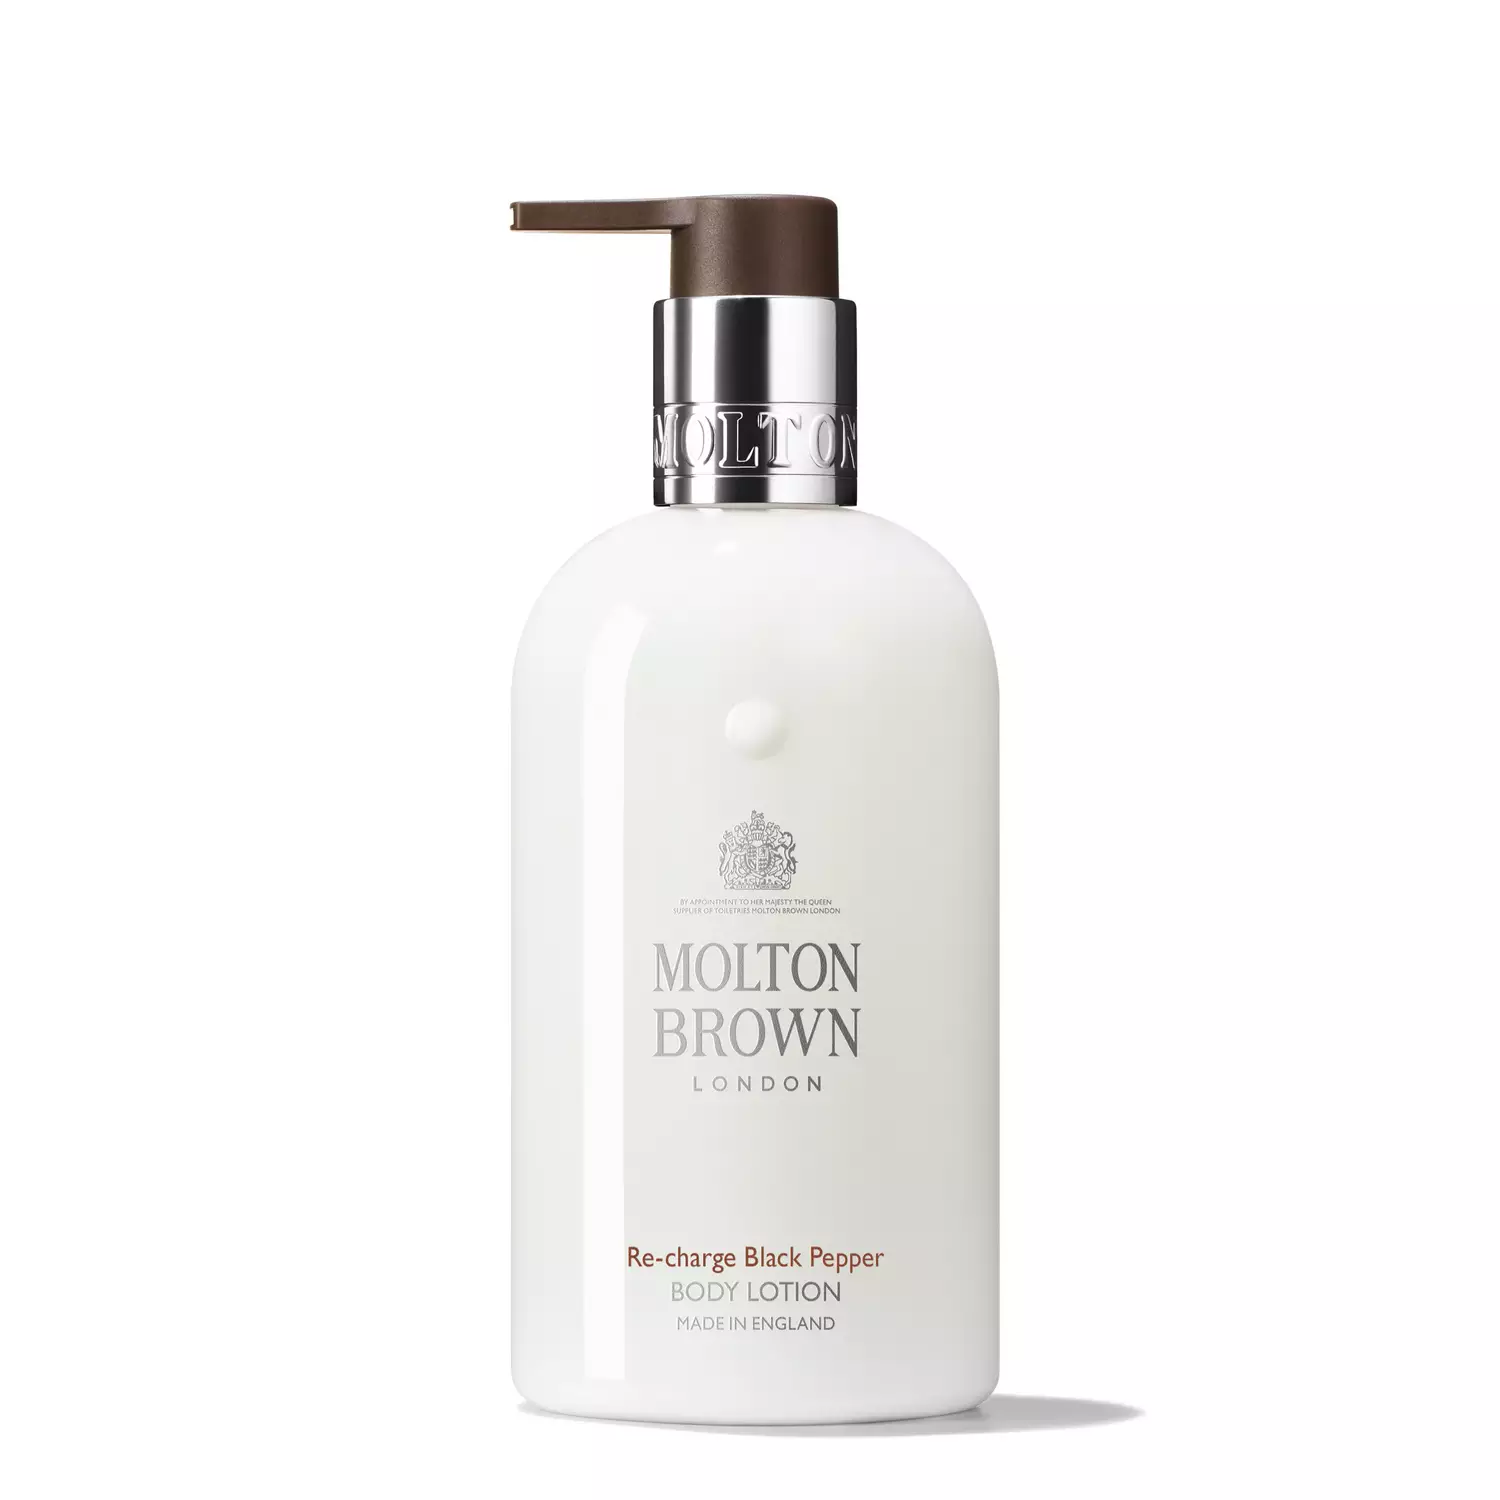 Molton Brown - Re-Charge Black Pepper - Body Lotion 